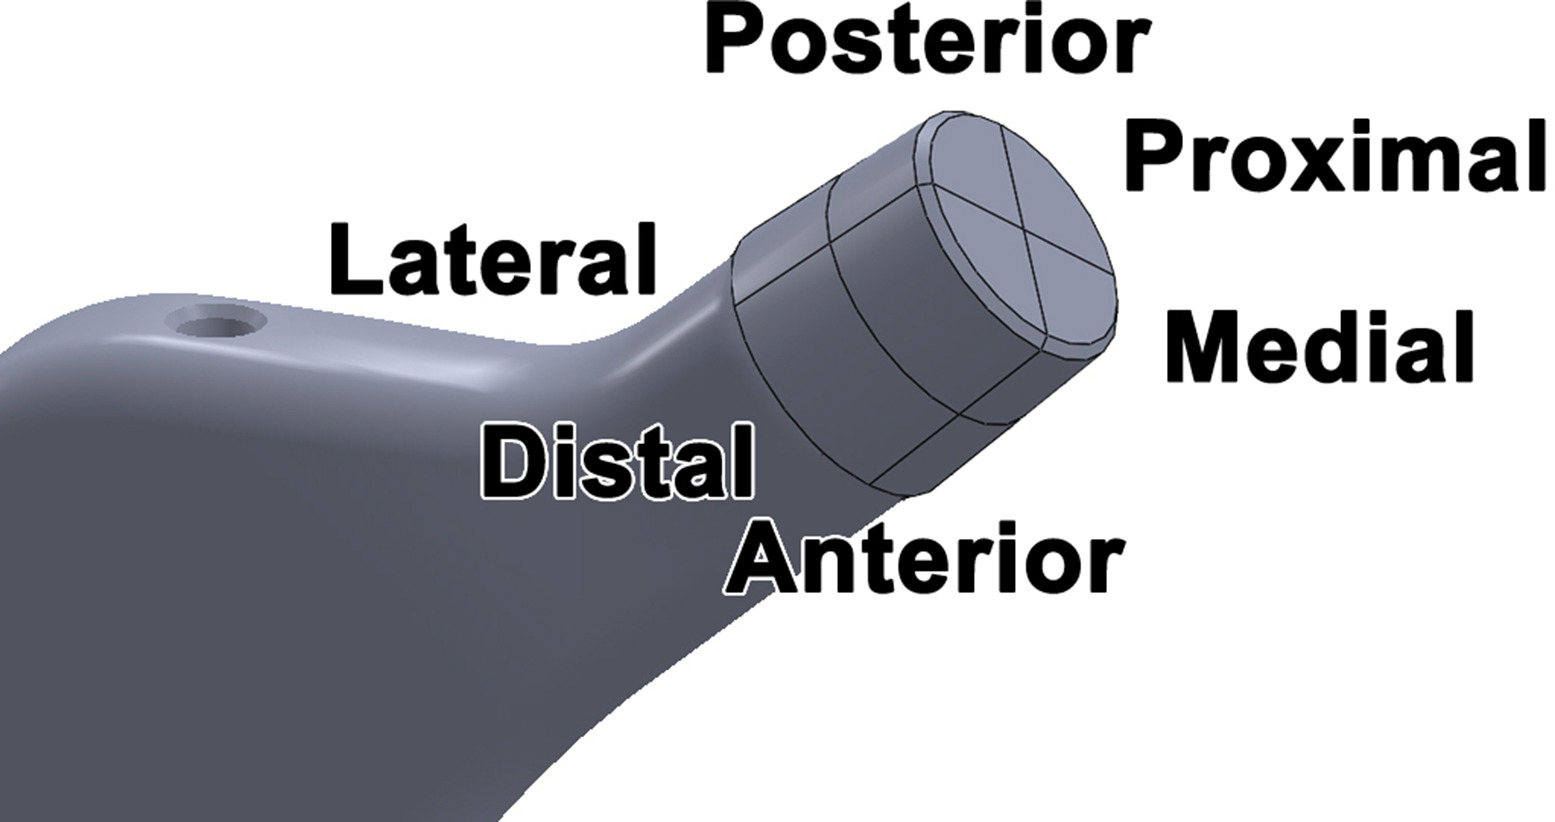 Fig. 5 
          Definition of taper regions by dividing into quarters corresponding to medial, lateral, anterior, and posterior aspects, and dividing into proximal and distal halves. Head taper regions match stem taper regions.
        